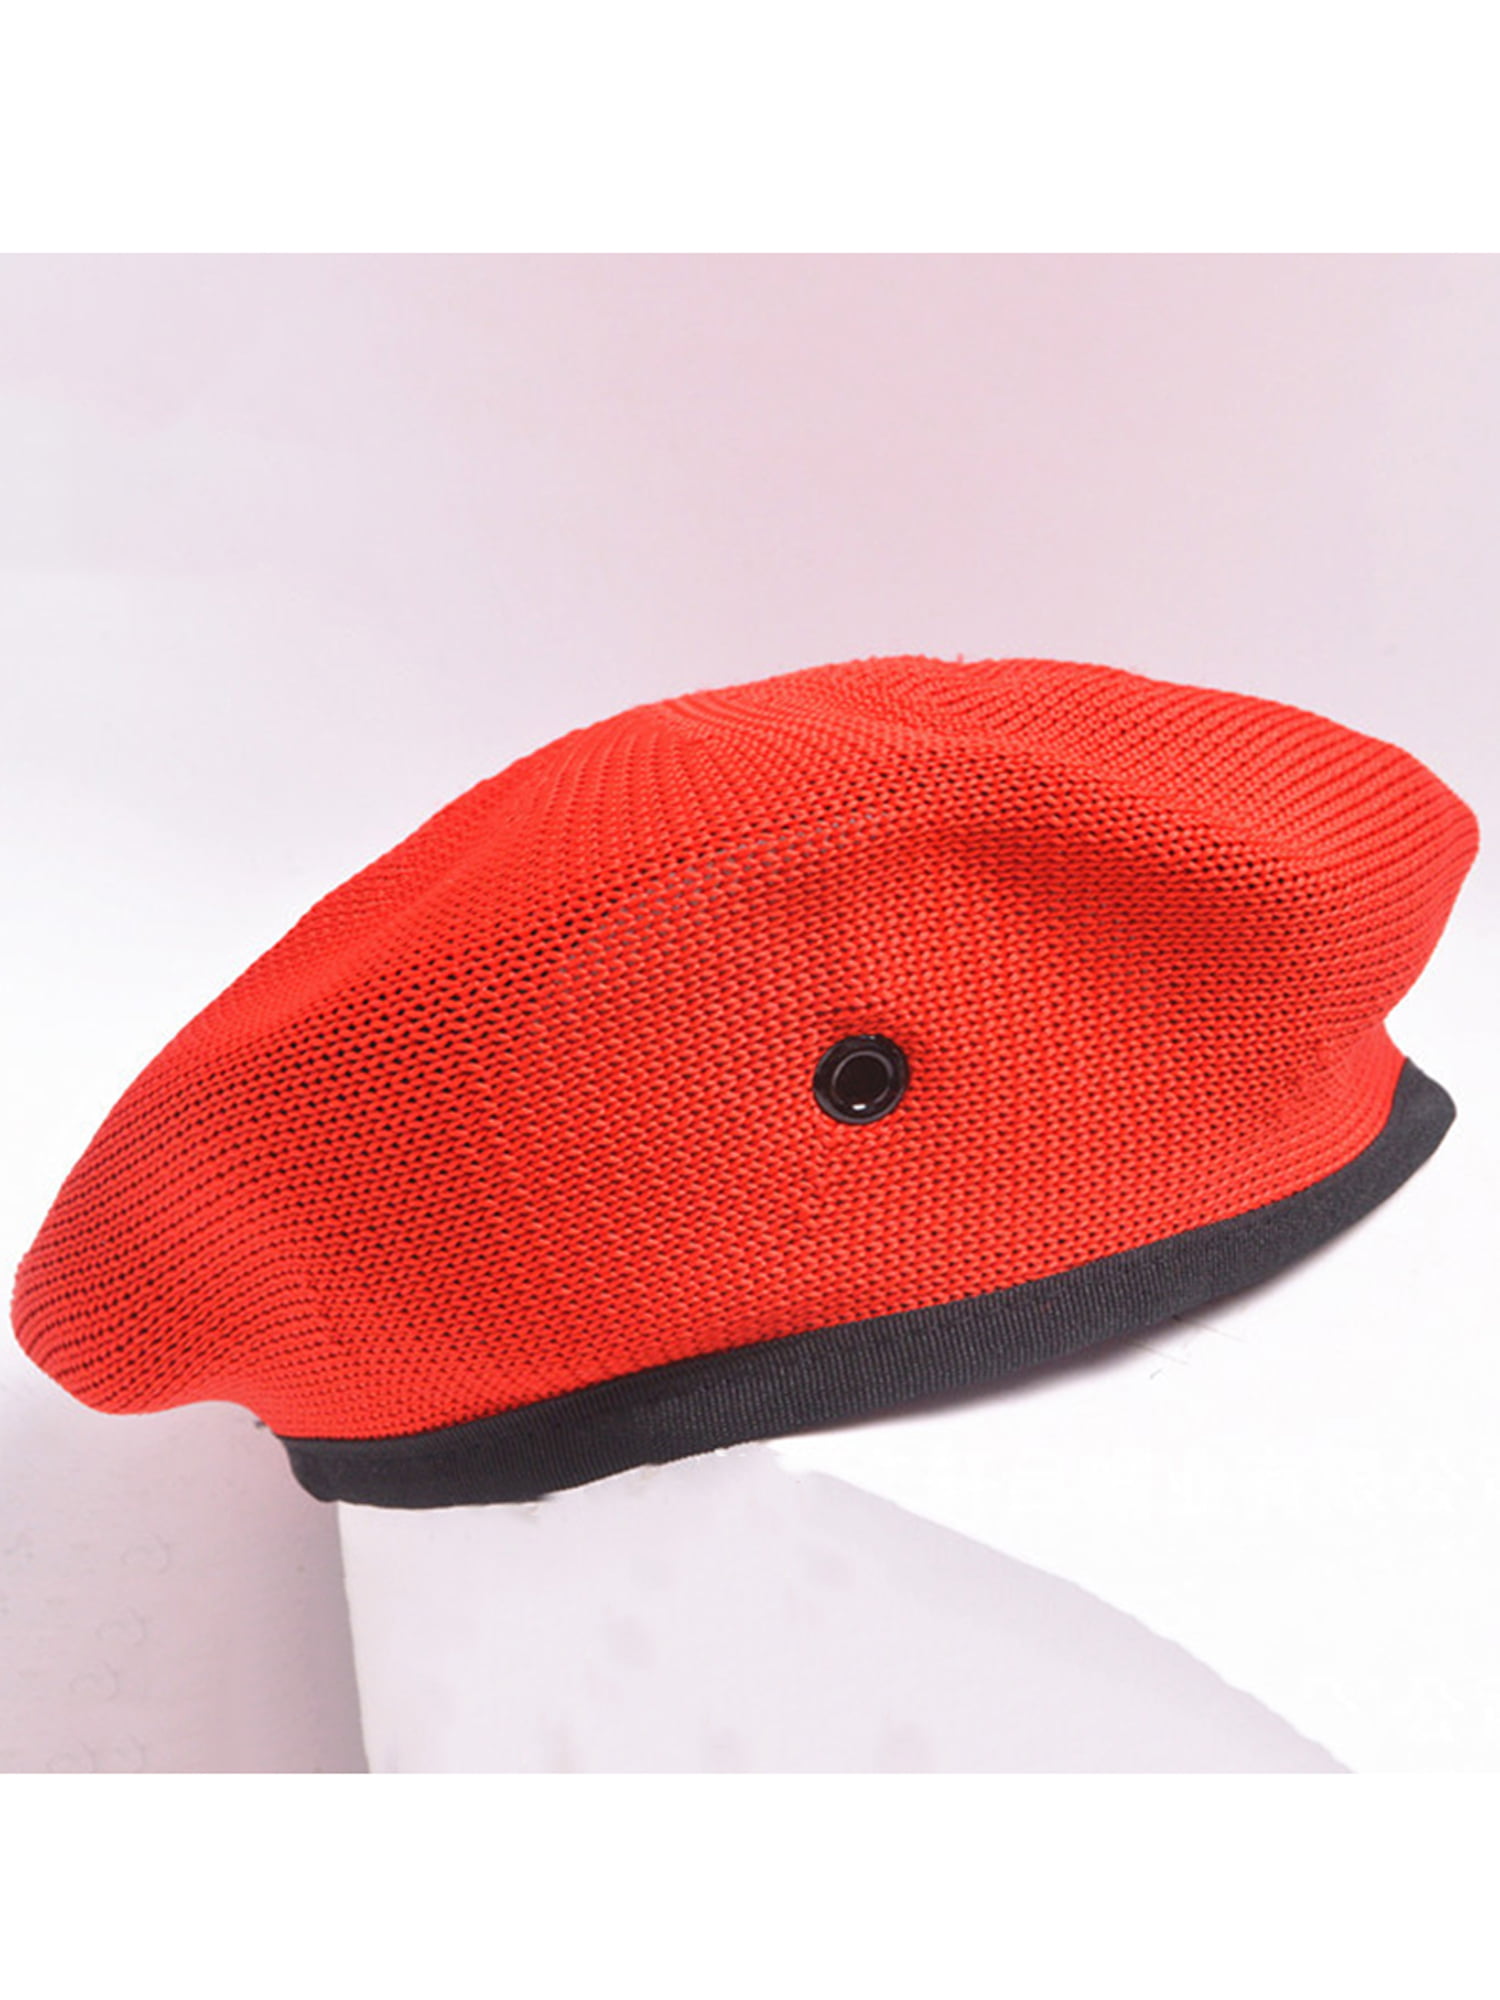 MFH Beret Hat Military Tactical Army Wool Soldier Red 